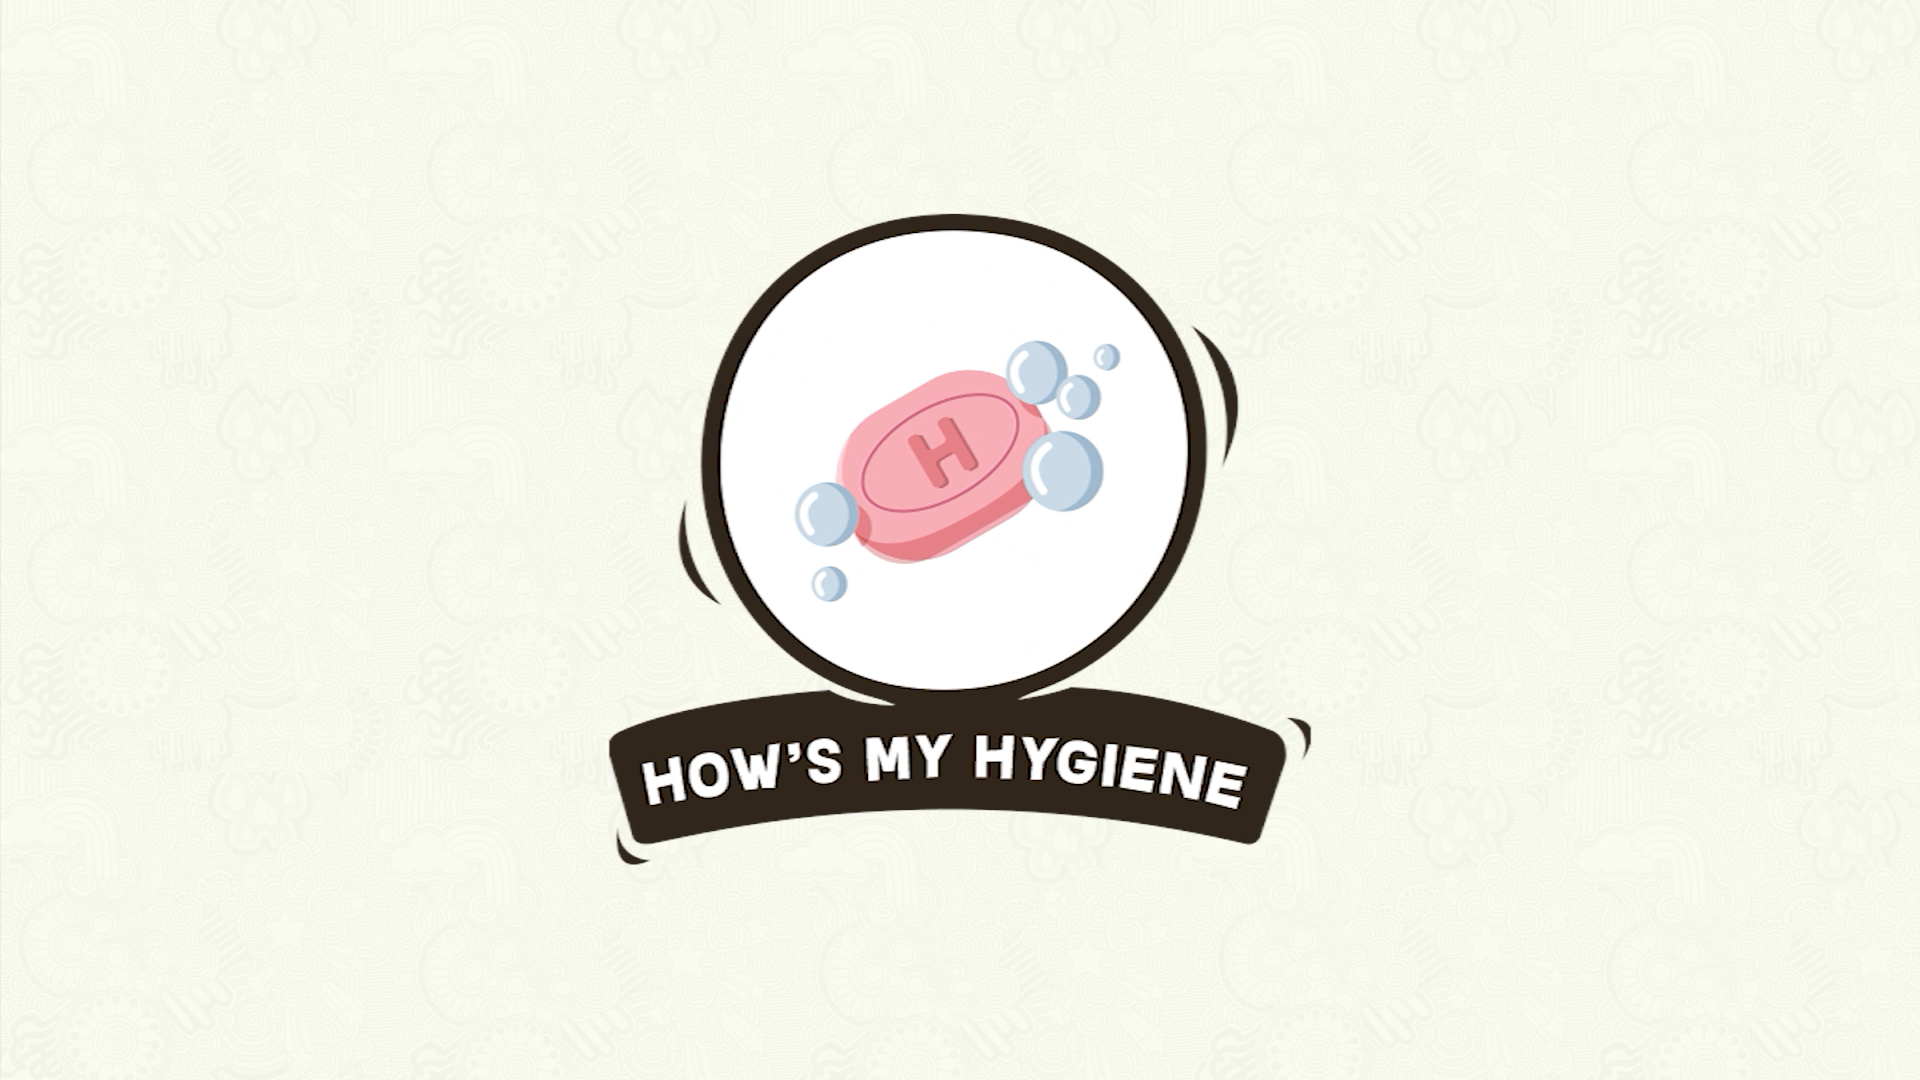 Hygiene Logo (For Sell) - The Crit Pit - Graphic Design Forum